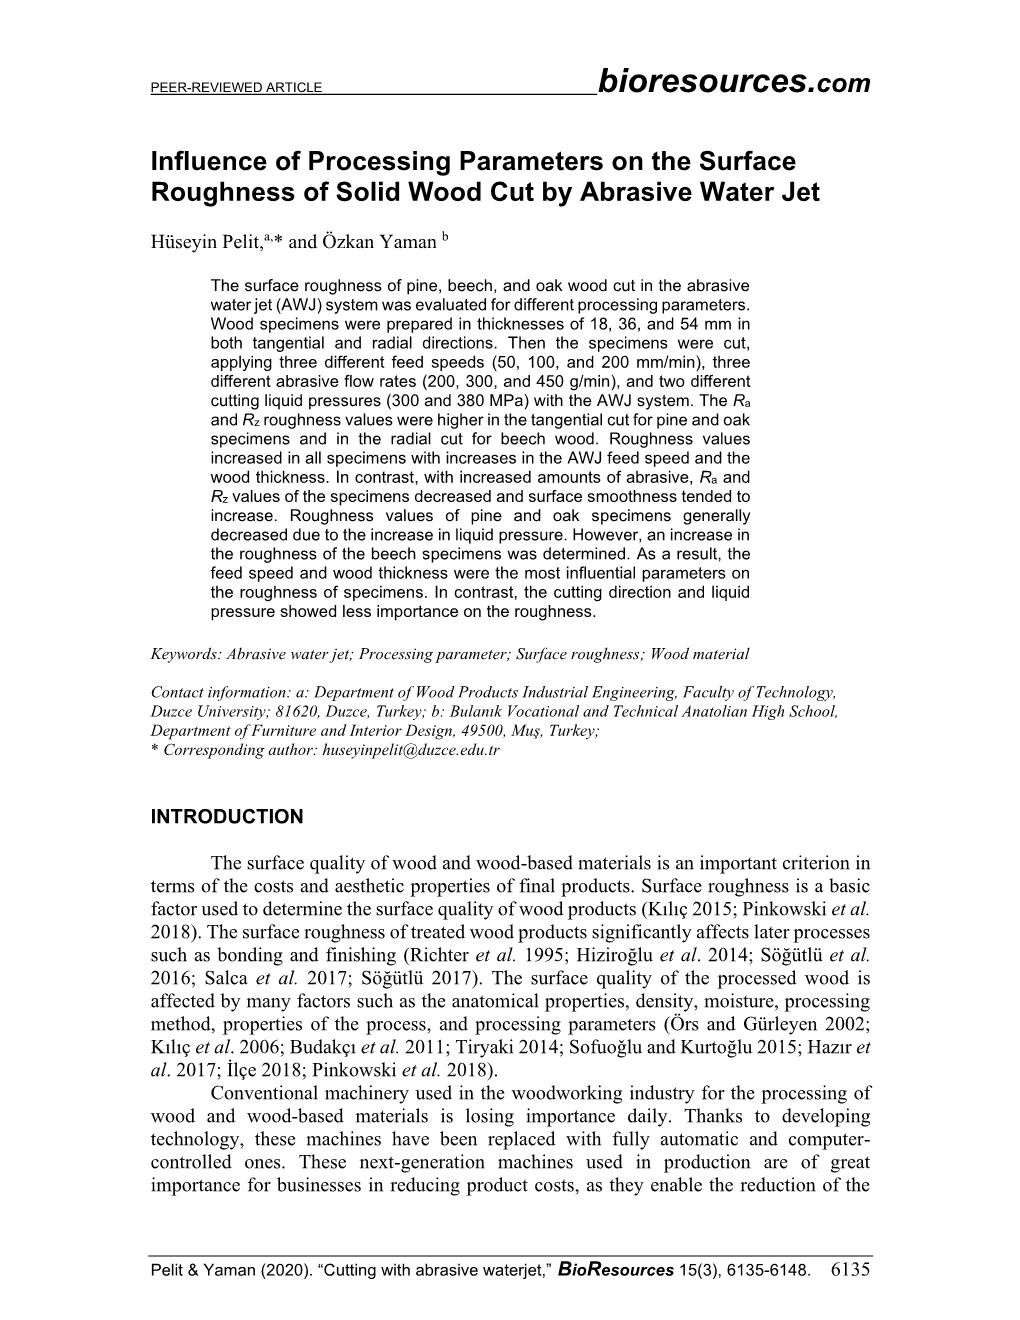 Influence of Processing Parameters on the Surface Roughness of Solid Wood Cut by Abrasive Water Jet